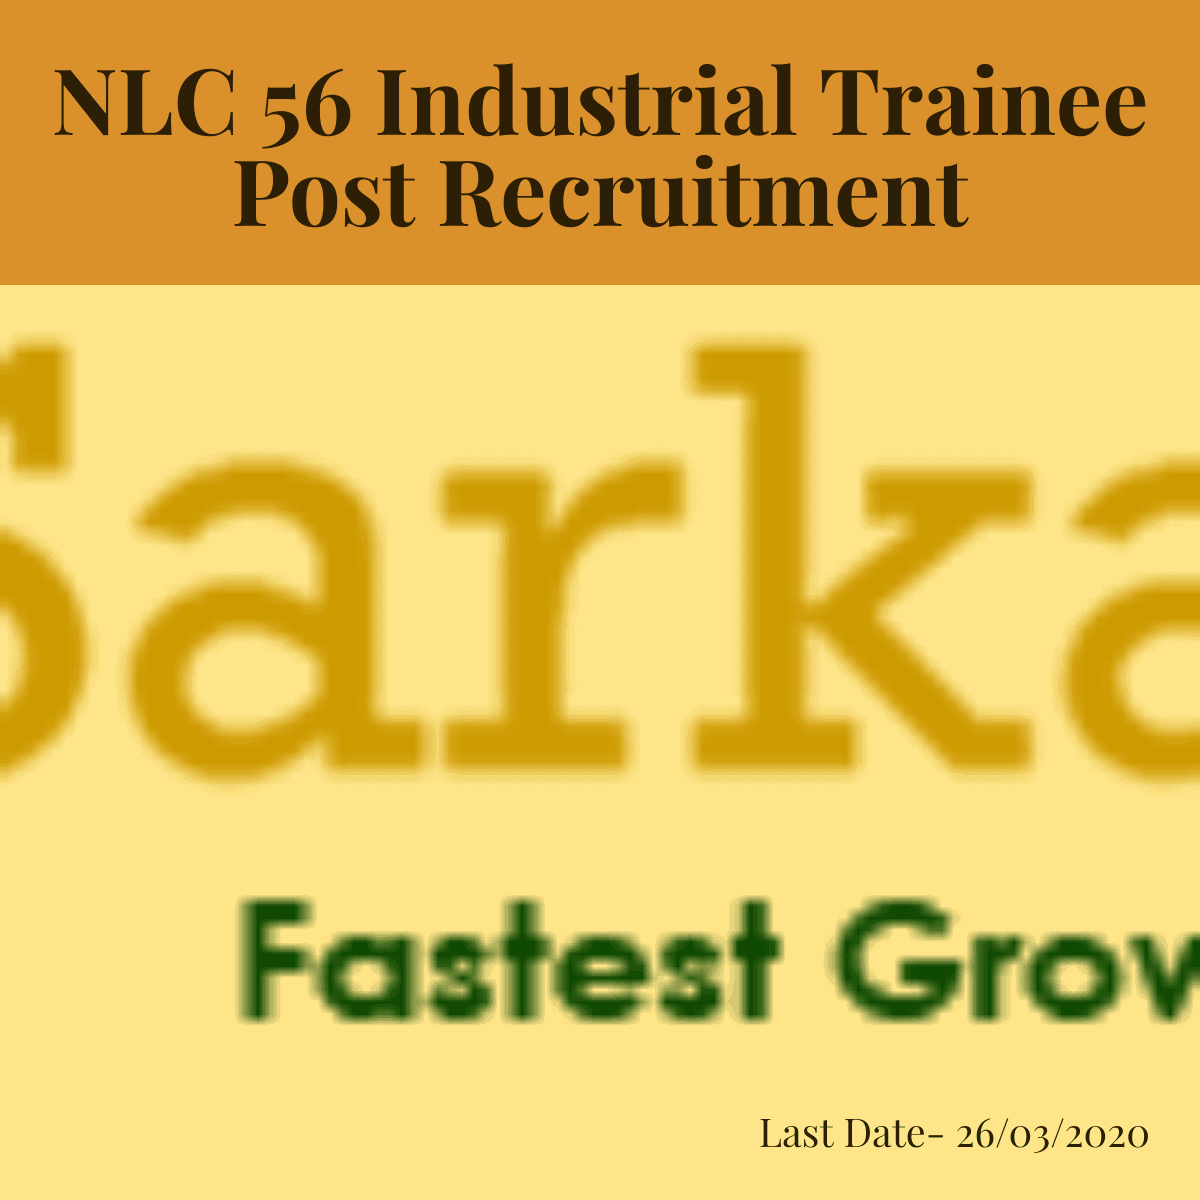 NLC Recruitment 2020 for Industrial Trainee Post 1